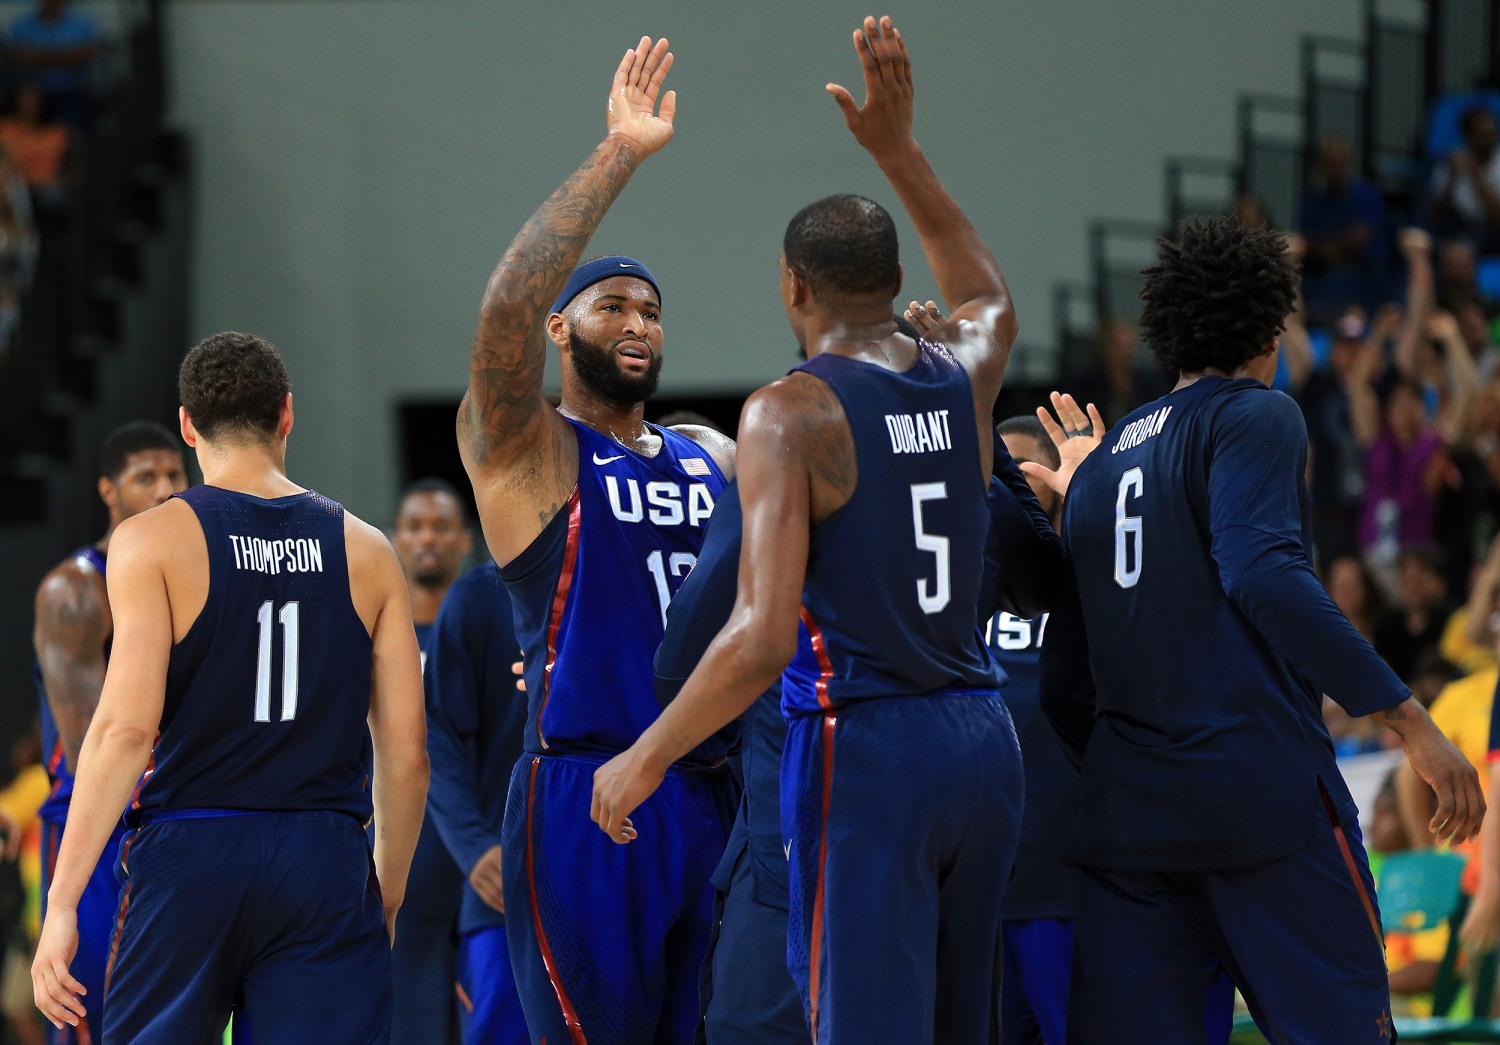 Kevin Durant giving away true height by standing next to DeMarcus Cousins, Sporting News